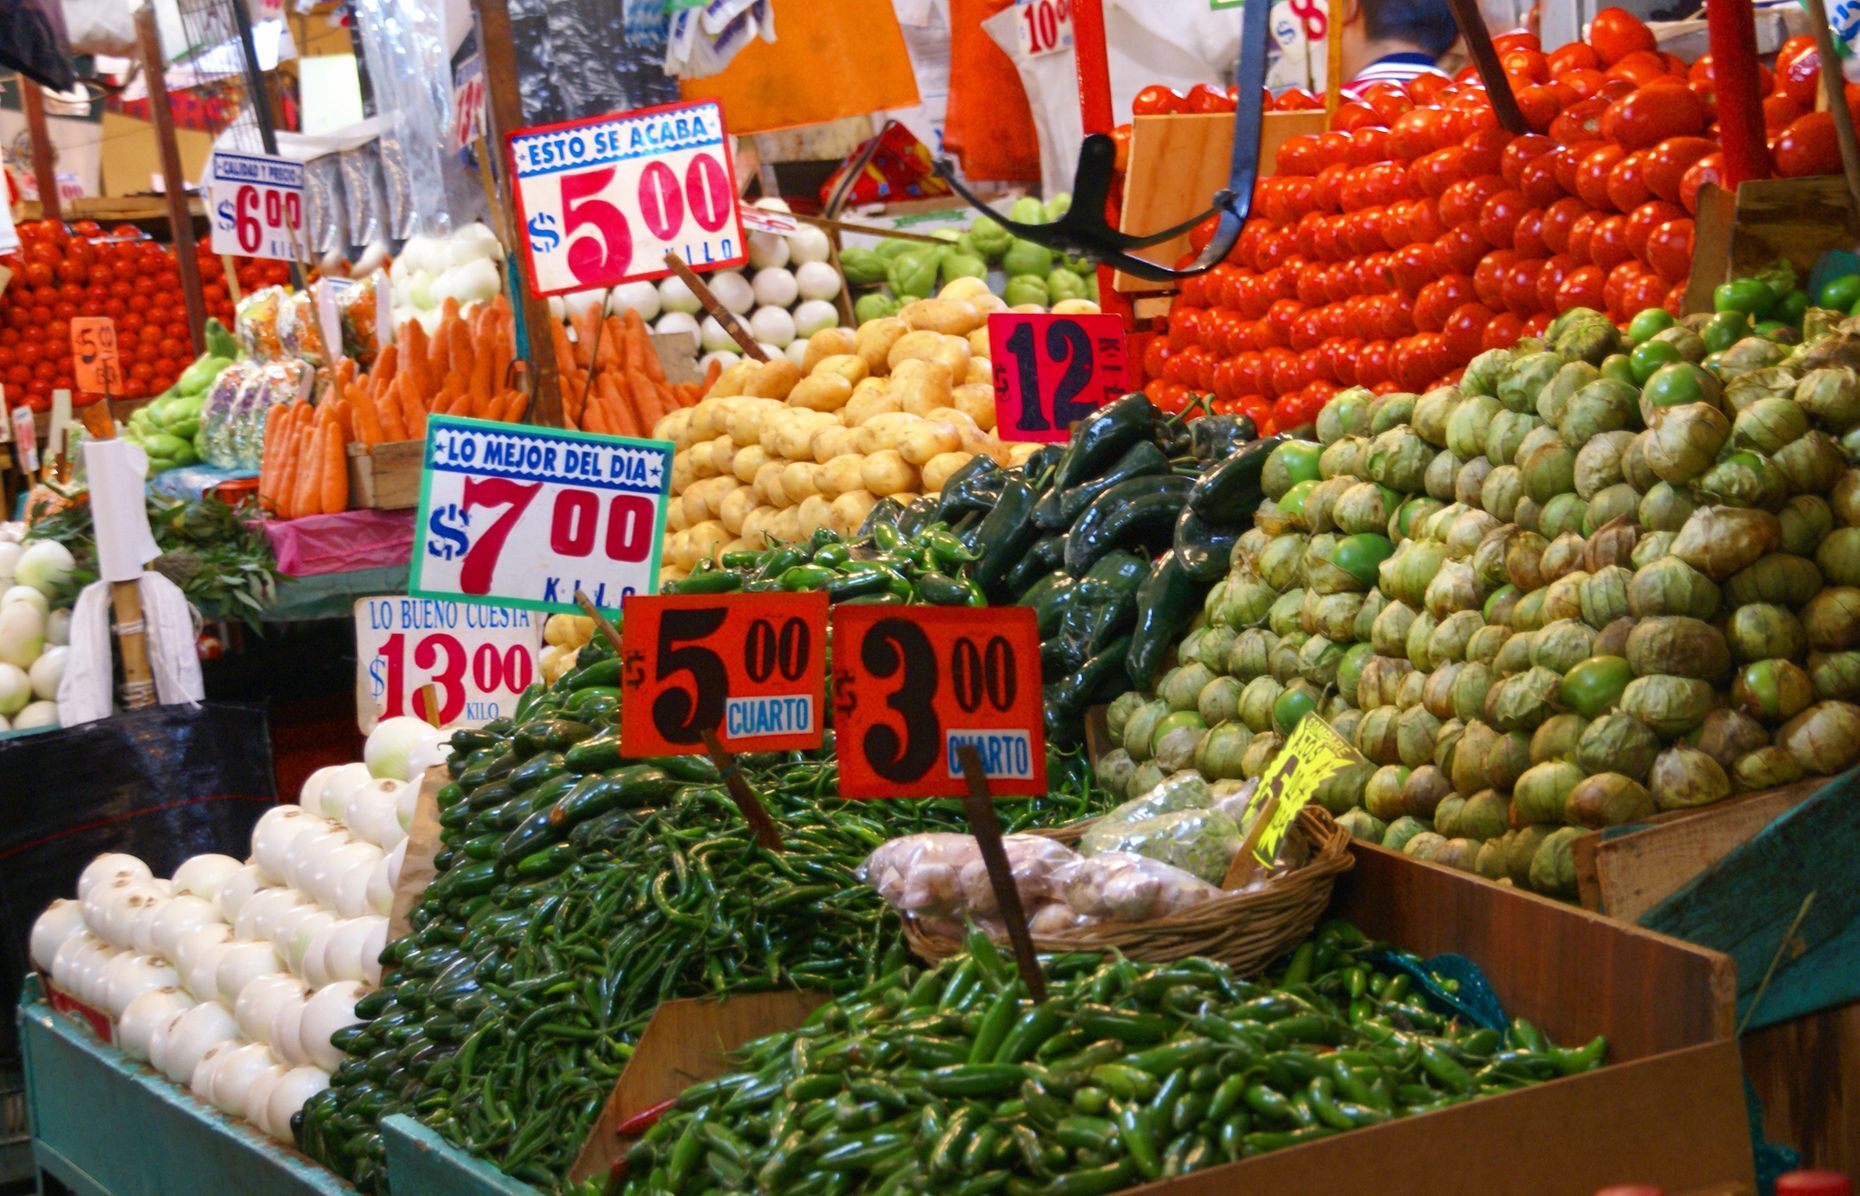 <p>Monthly minimum: $175</p><p>You shouldn’t have any trouble finding great, inexpensive food in Mexico’s capital. According to <a href="https://www.investopedia.com/articles/personal-finance/111015/how-much-money-do-you-need-live-mexico-city.asp" title="https://www.investopedia.com/articles/personal-finance/111015/how-much-money-do-you-need-live-mexico-city.asp">Investopedia</a>, “Grocery stores, bakeries, and markets are located everywhere in Mexico City, making it easy to keep your pantry stocked and your refrigerator full.” And if you’re looking to eat out, you can easily get a meal from a local restaurant or street vendor for just $5.</p>